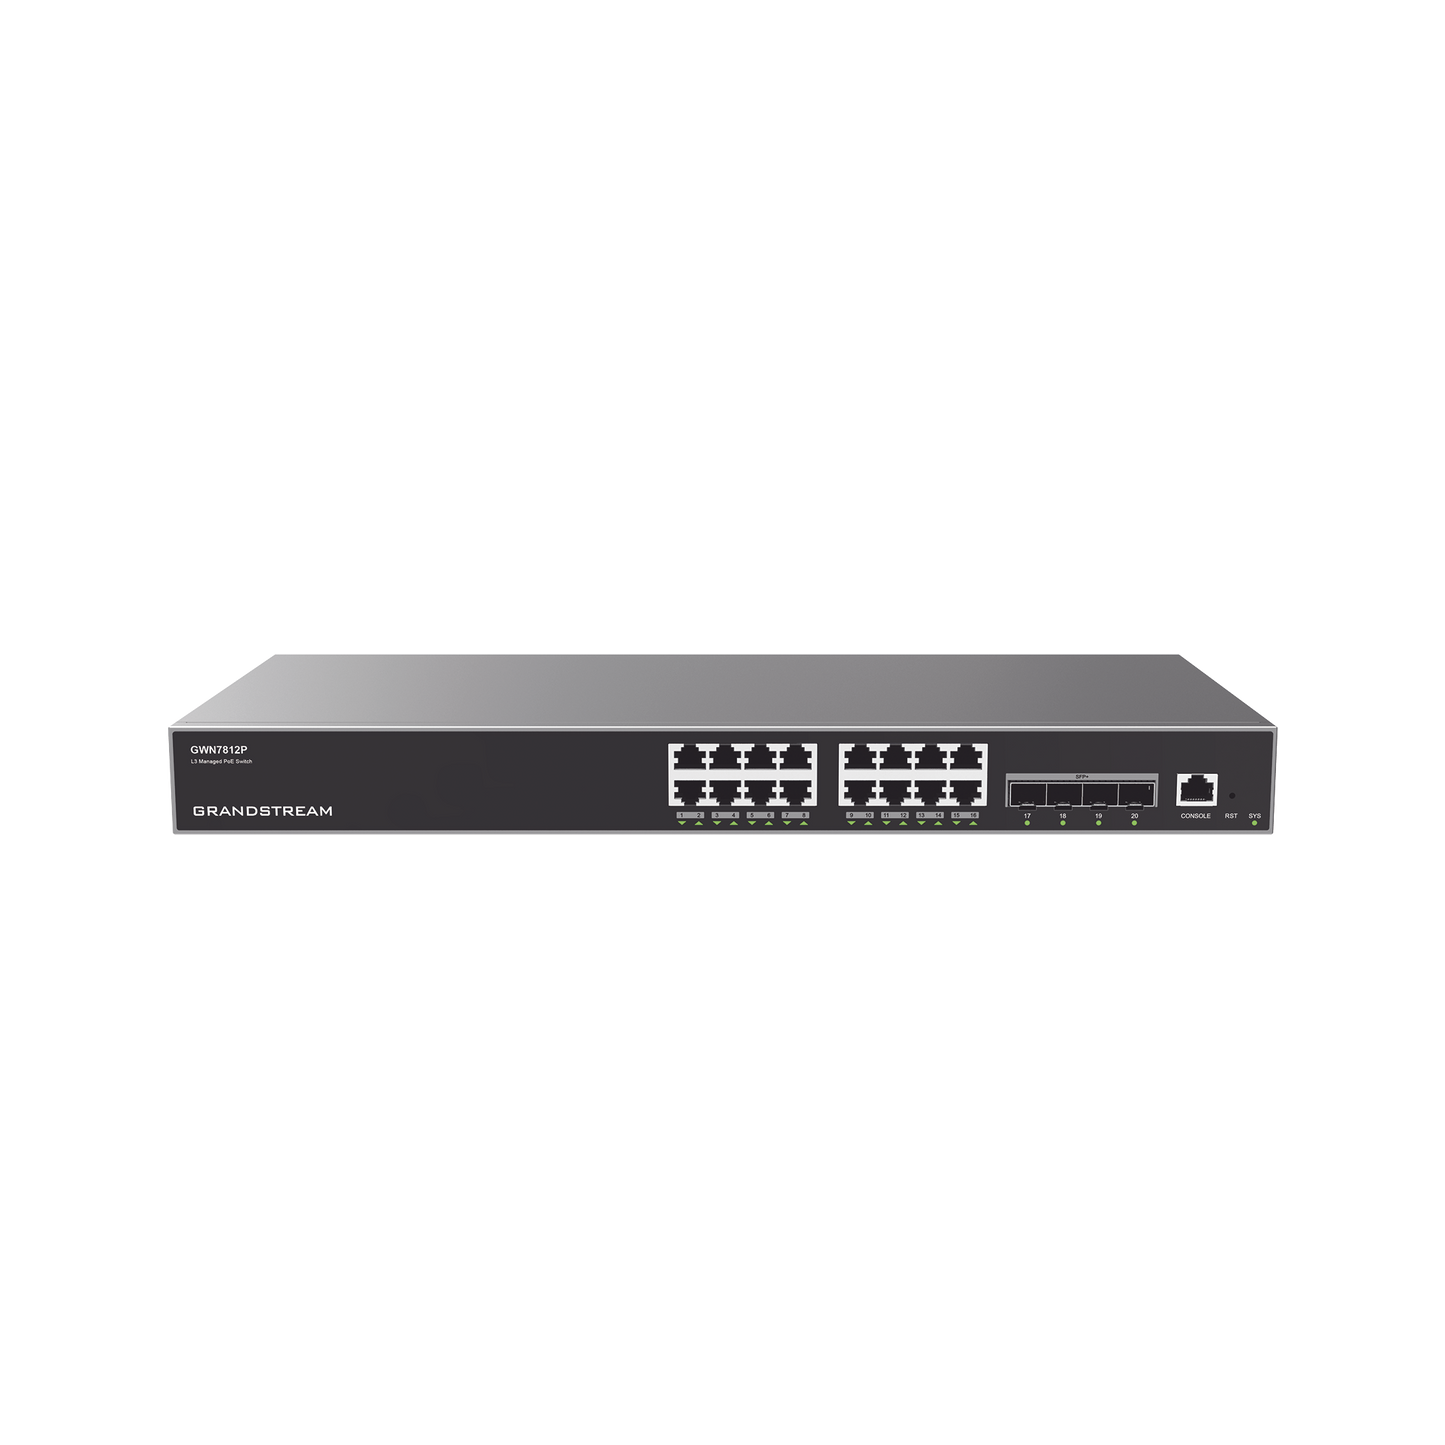 Managed Gigabit PoE+ Switch / 16 ports 10/100/1000 Mbps + 4 SFP Uplink Ports / Up to 240W / Compatible with GWN Cloud.